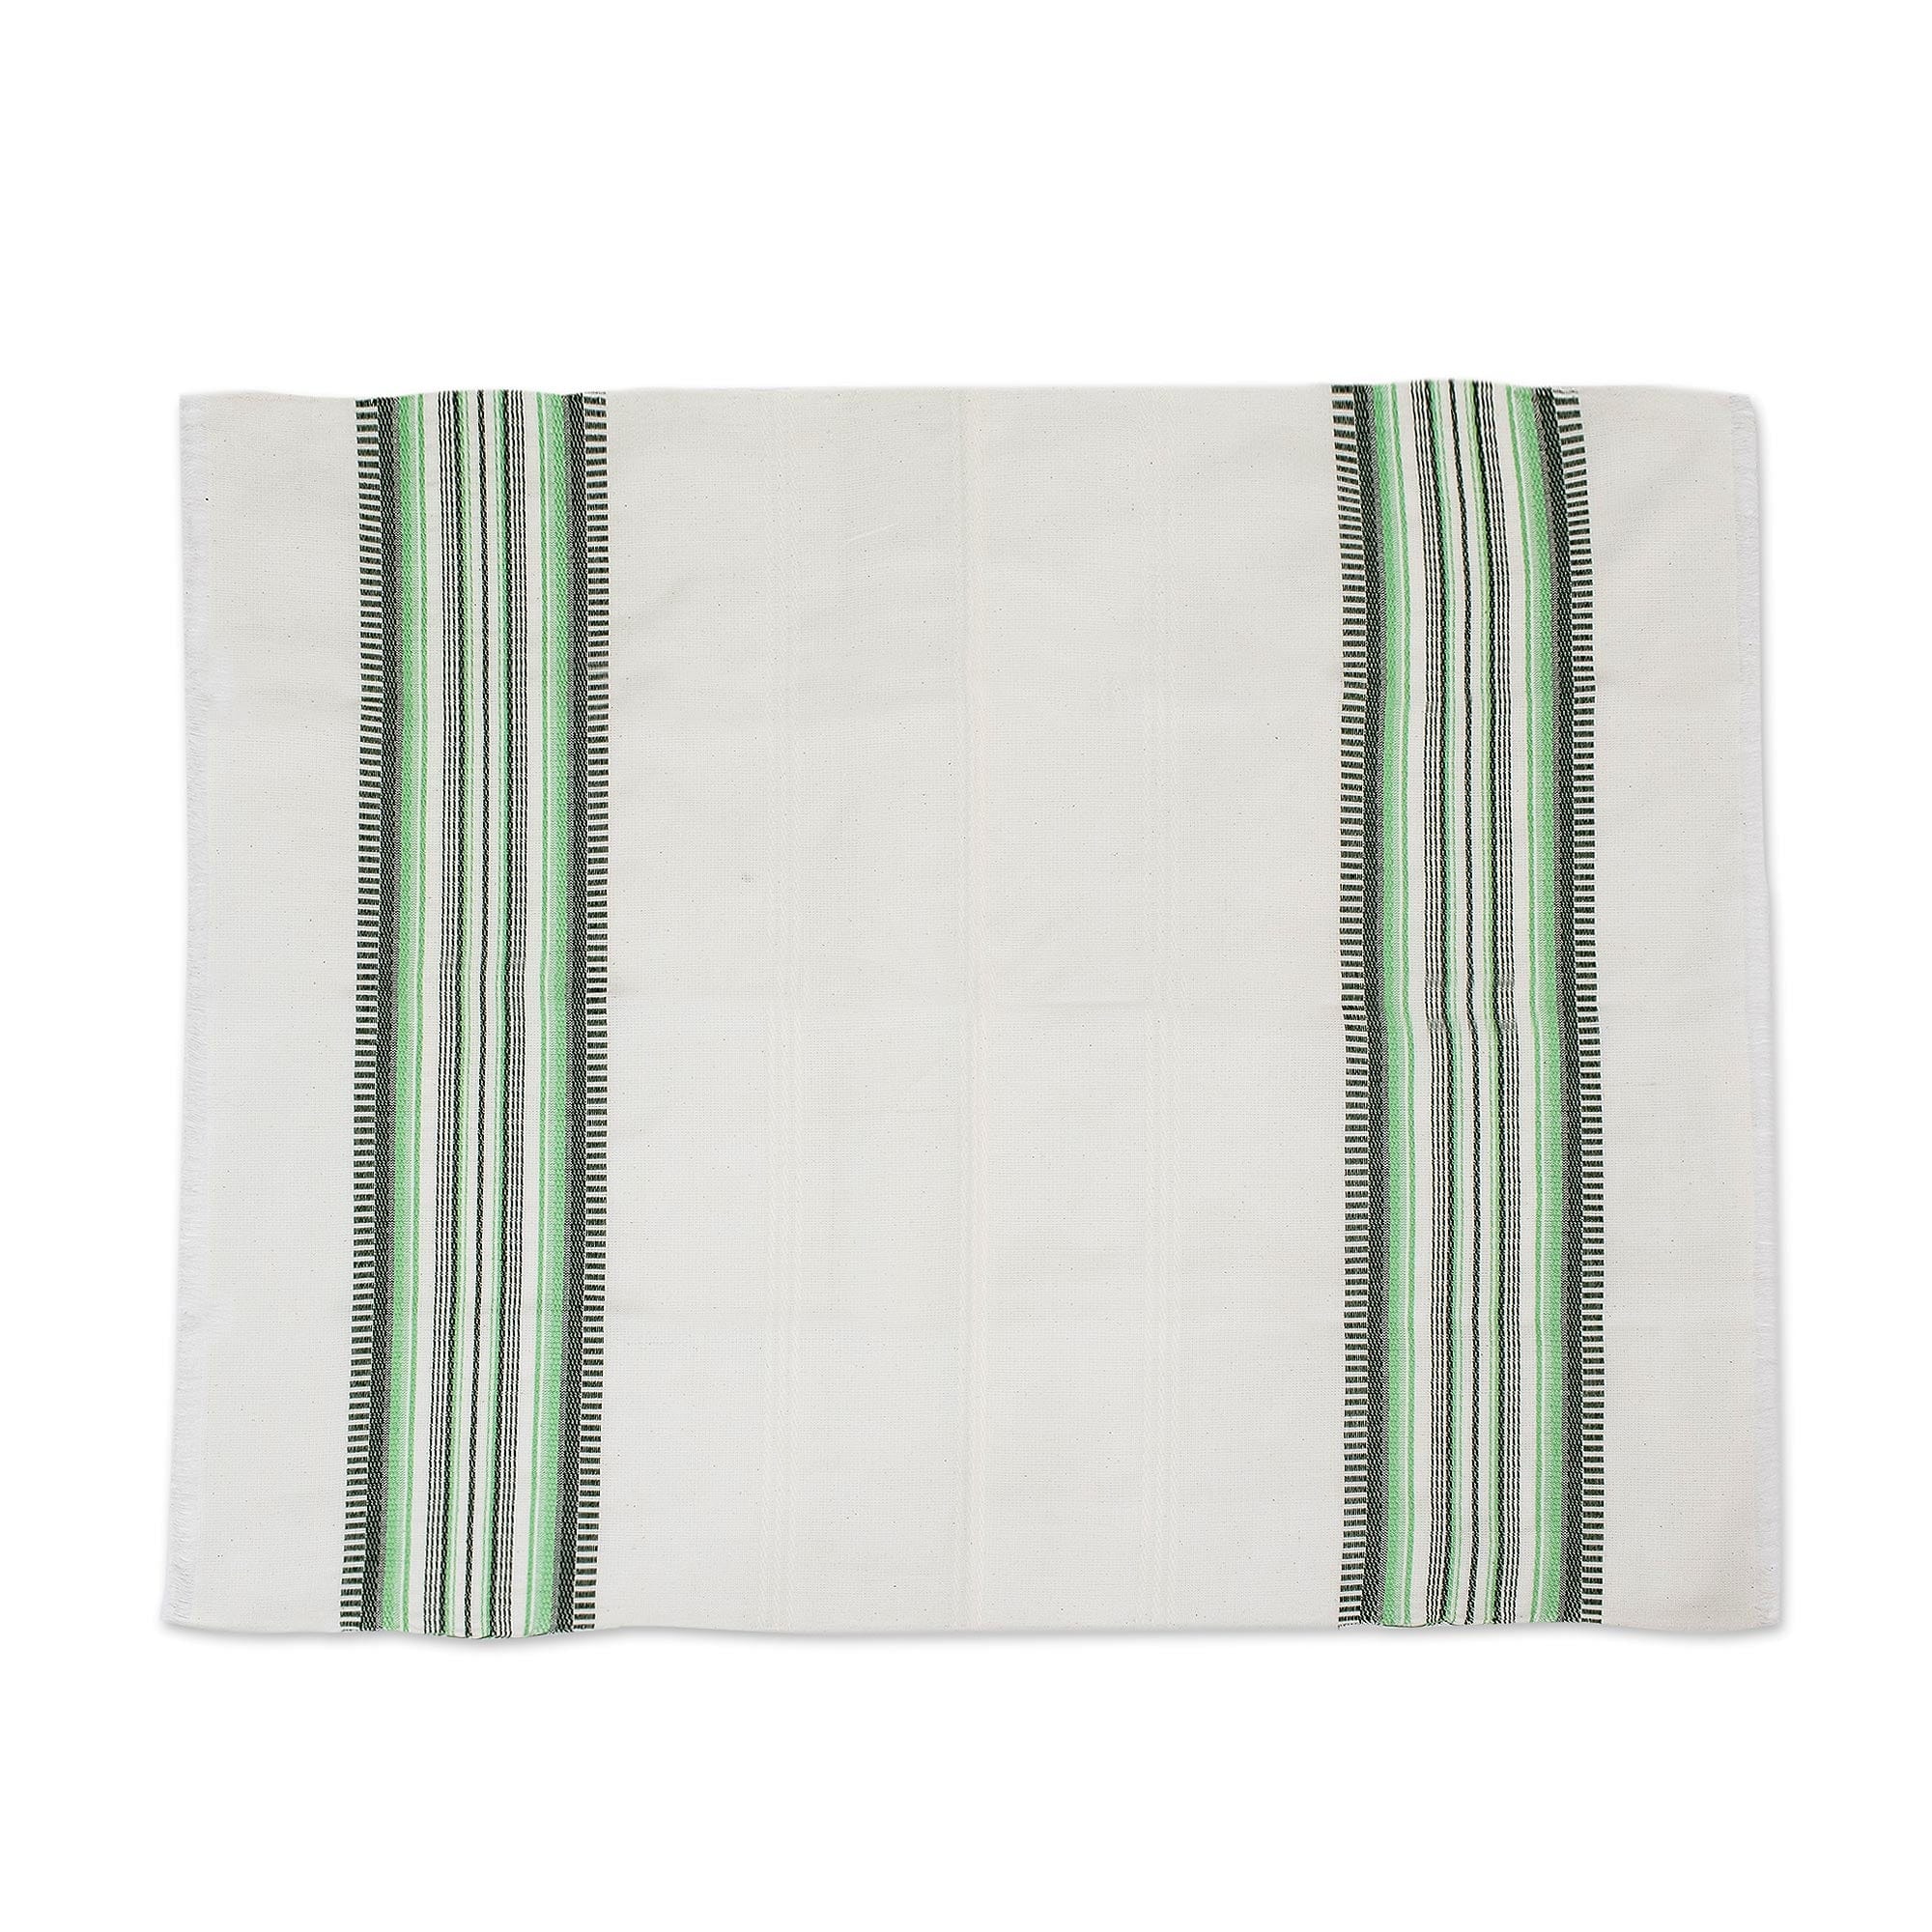 Hand Woven Hache Dish Towels | Black & White Stripes with Black Border